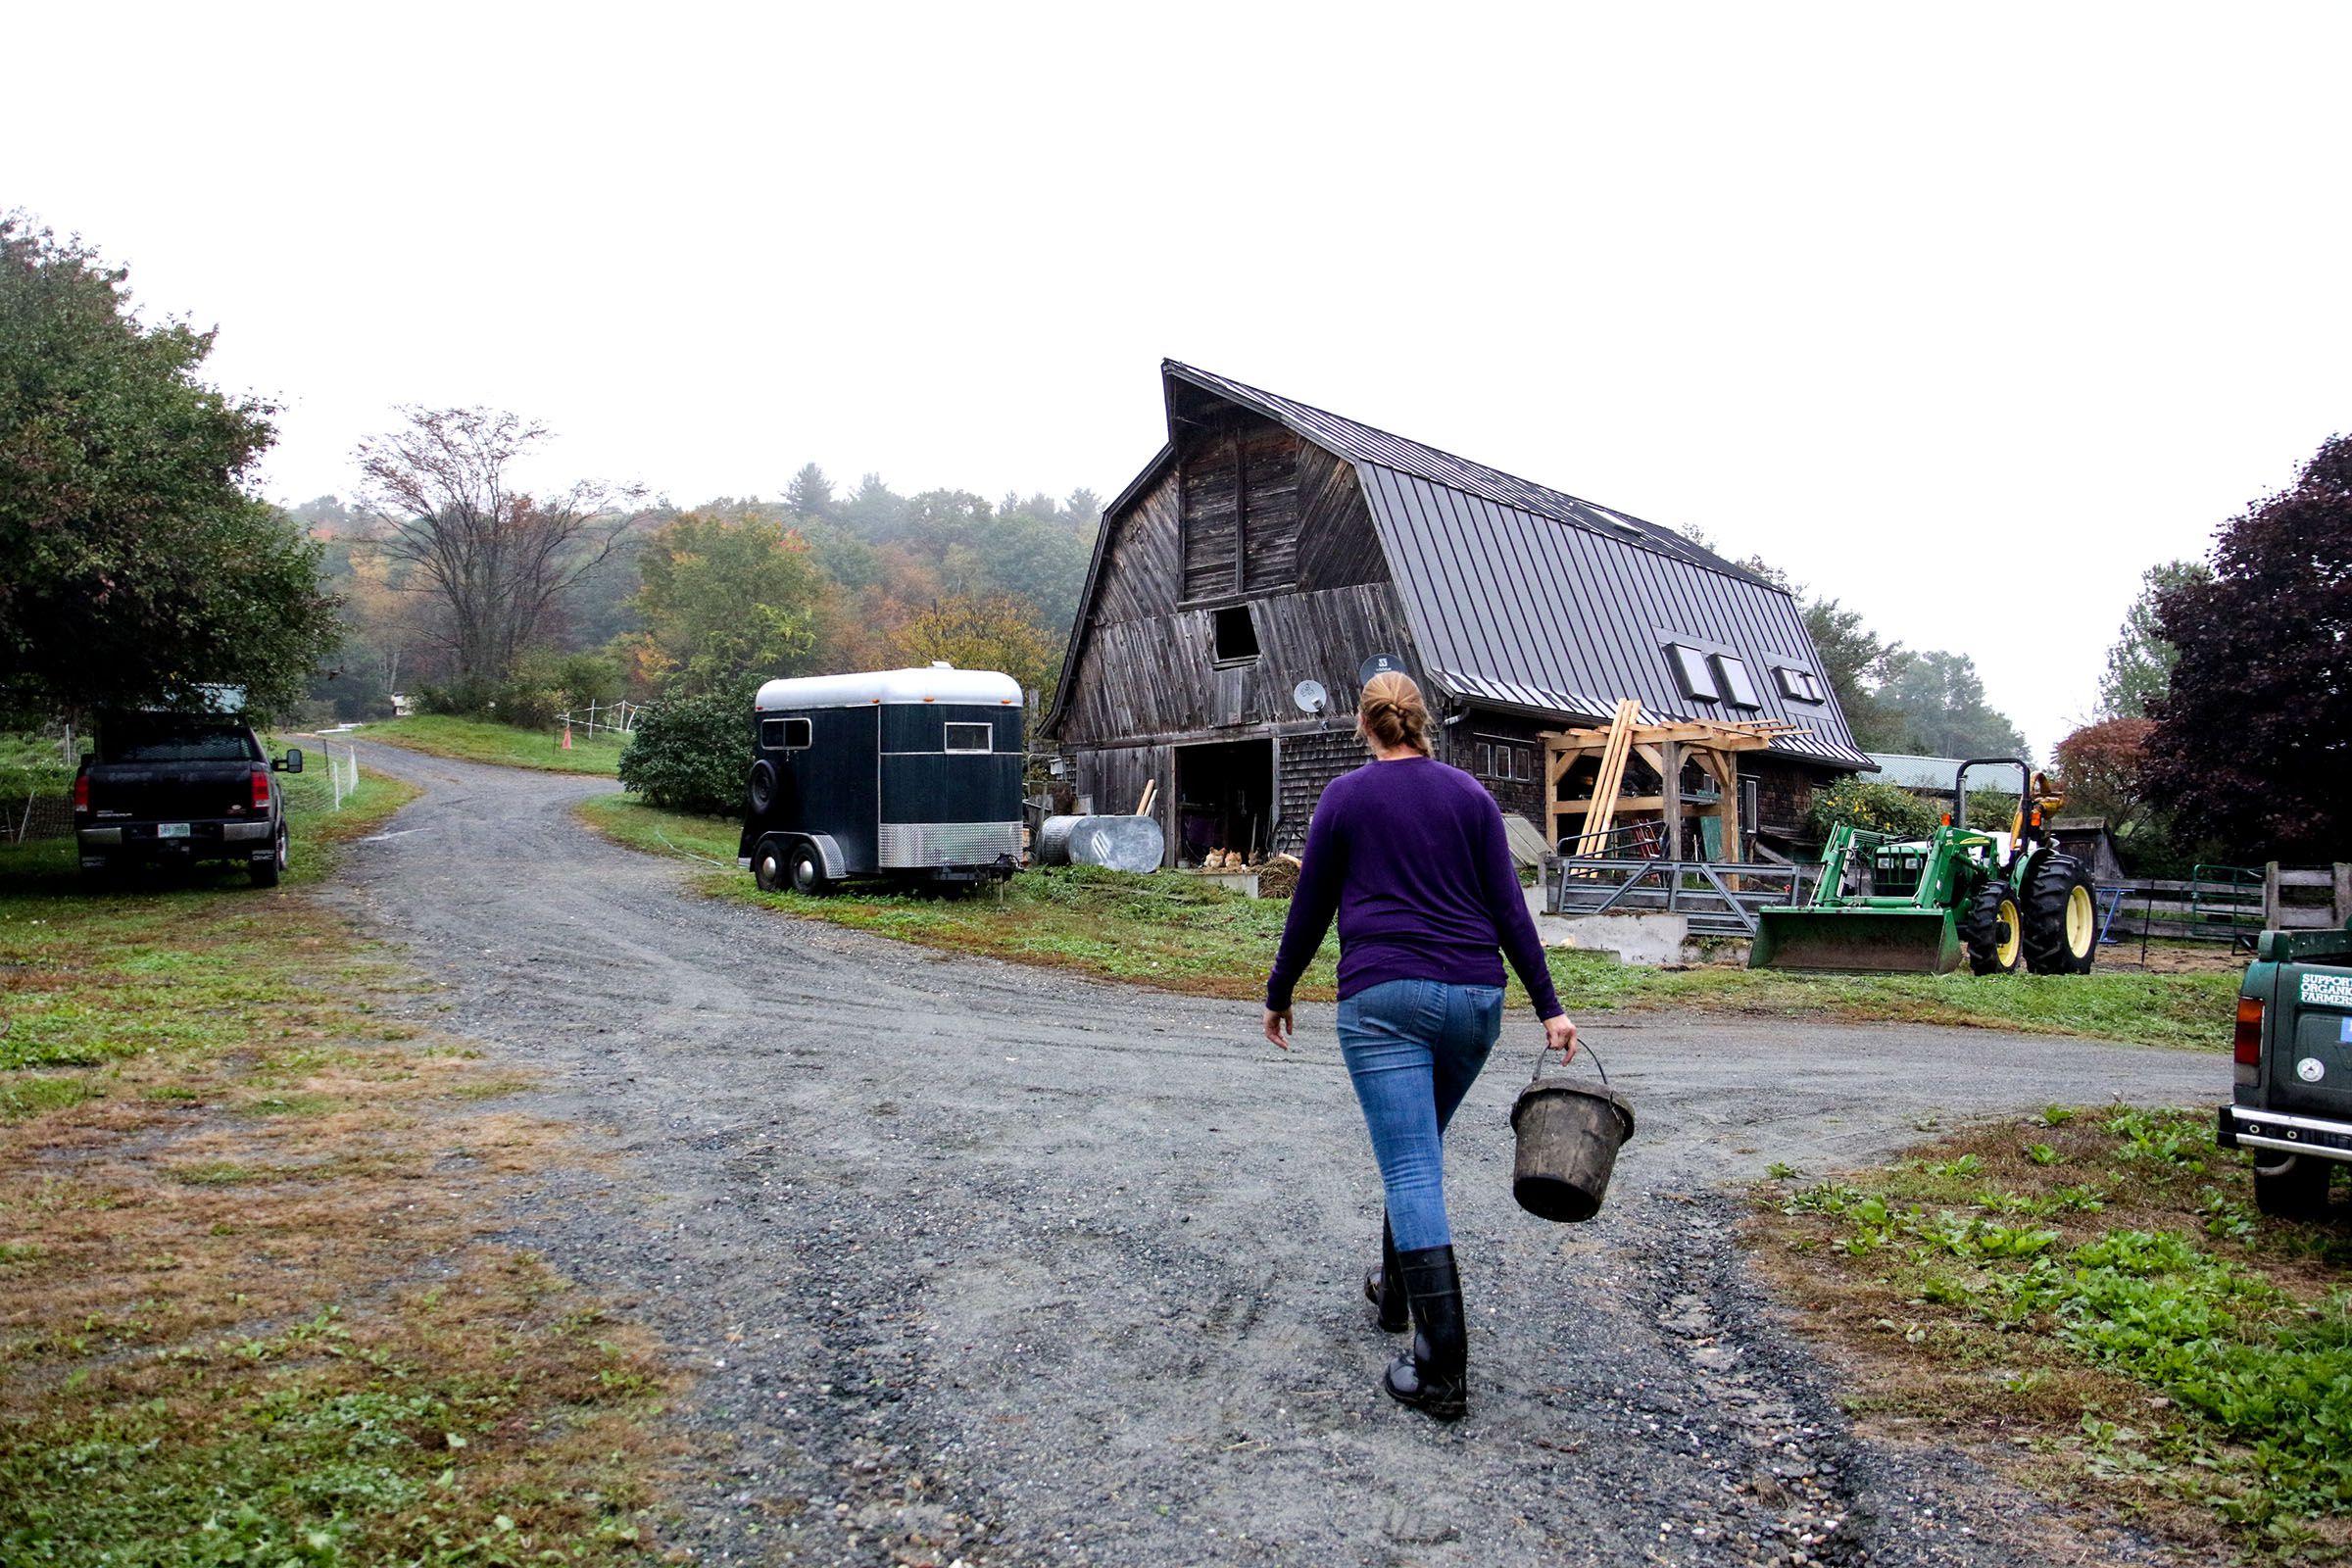 Heather Gallagher makes her way back to the barn upon completion of her morning chores at Many Summers Farm, in Cornish, N.H., on Monday, Oct. 8, 2018. (Valley News - August Frank) Copyright Valley News. May not be reprinted or used online without permission. Send requests to permission@vnews.com.